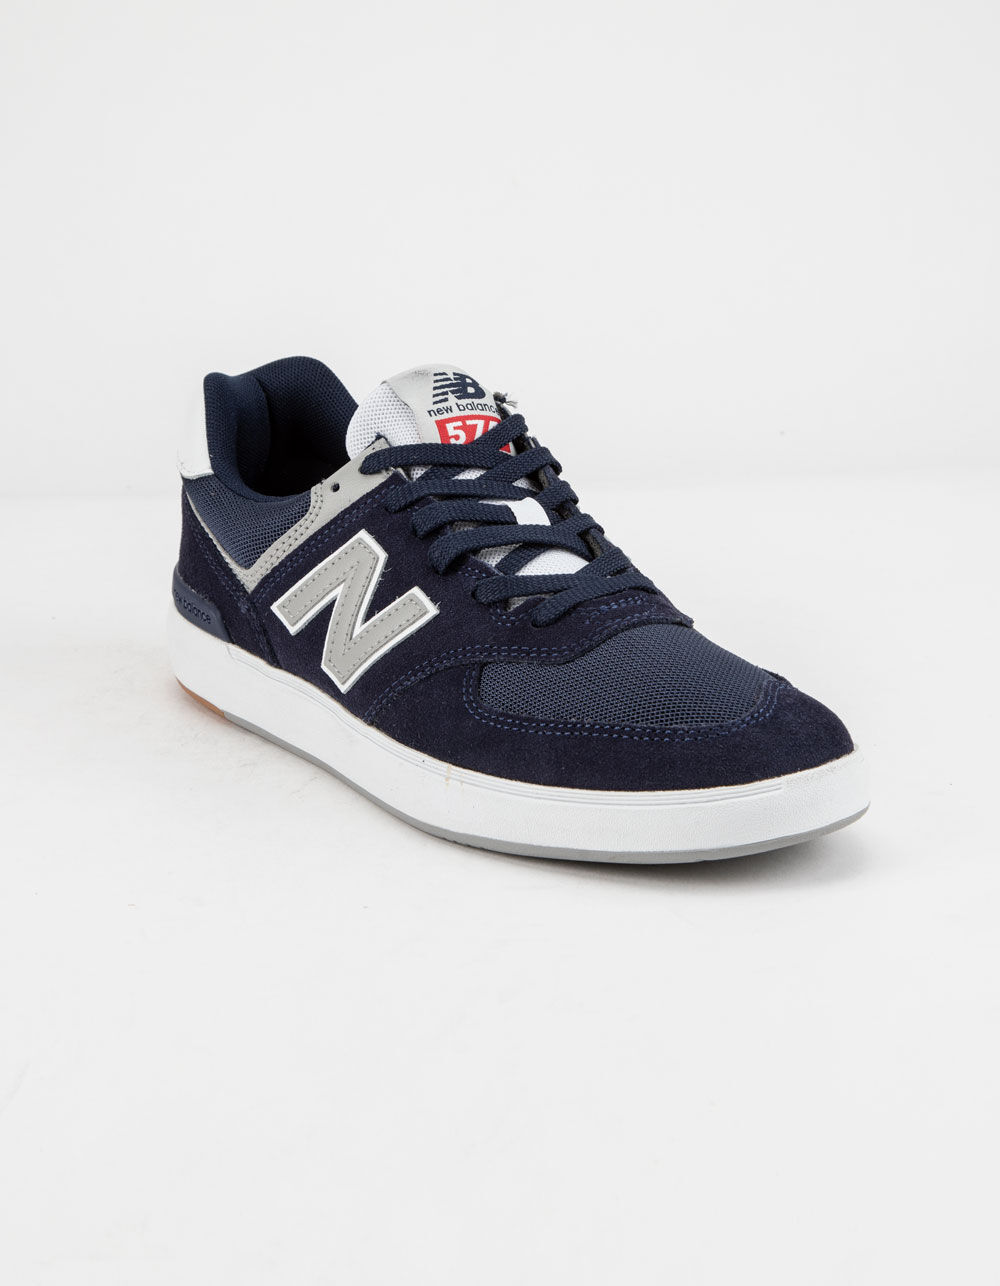 NEW BALANCE AM574 Navy With White Mens Shoes - NAVY/WHITE | Tillys